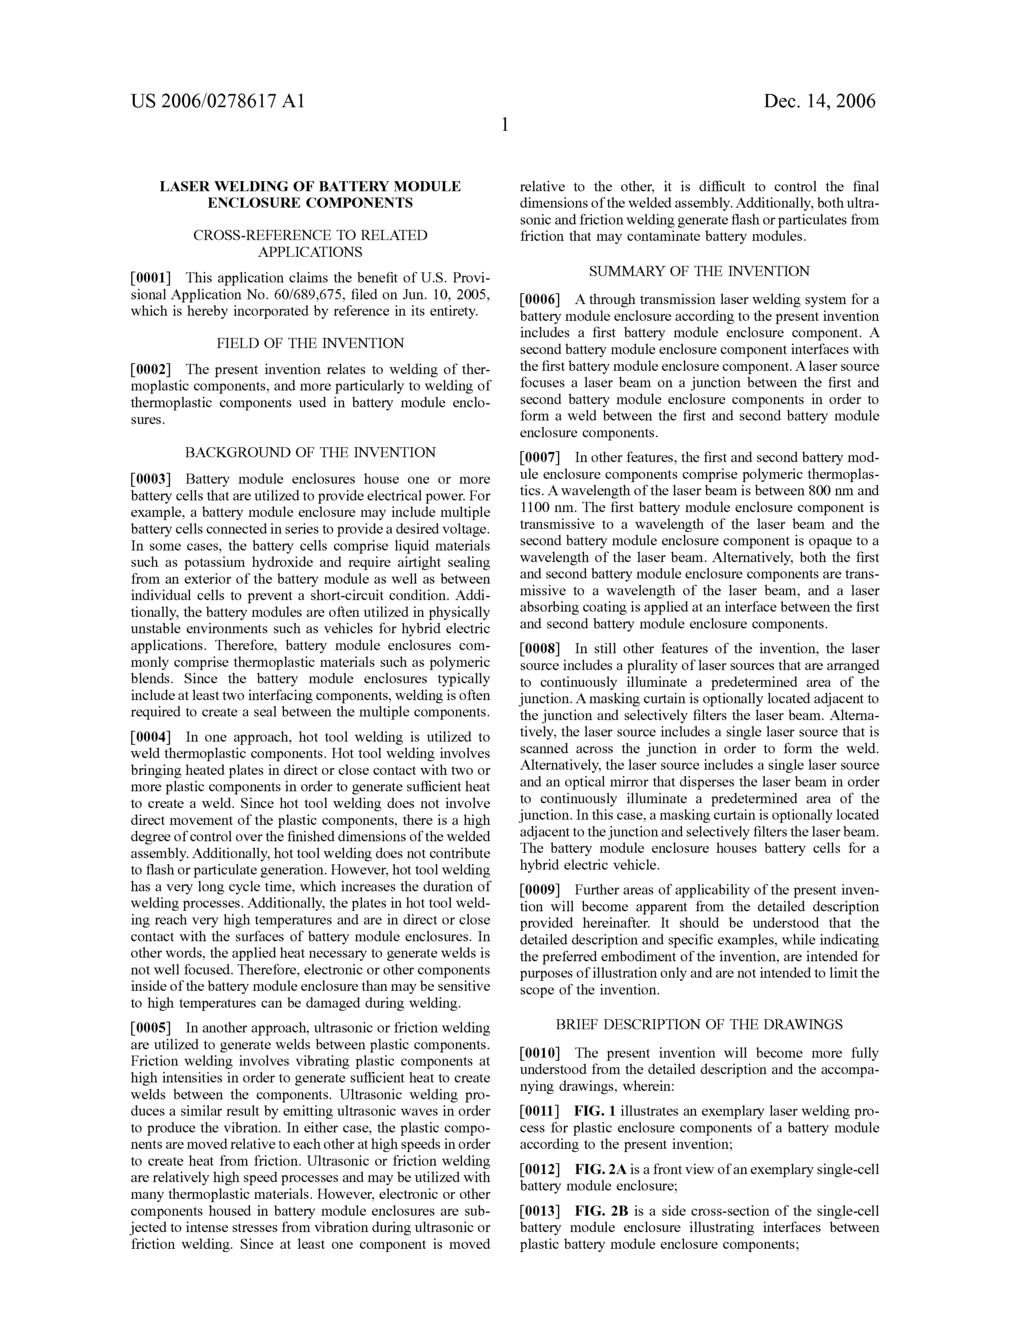 US 2006/02786 17 A1 Dec. 14, 2006 LASER WELDING OF BATTERY MODULE ENCLOSURE COMPONENTS CROSS-REFERENCE TO RELATED APPLICATIONS 0001) This application claims the benefit of U.S. Provi sional Application No.